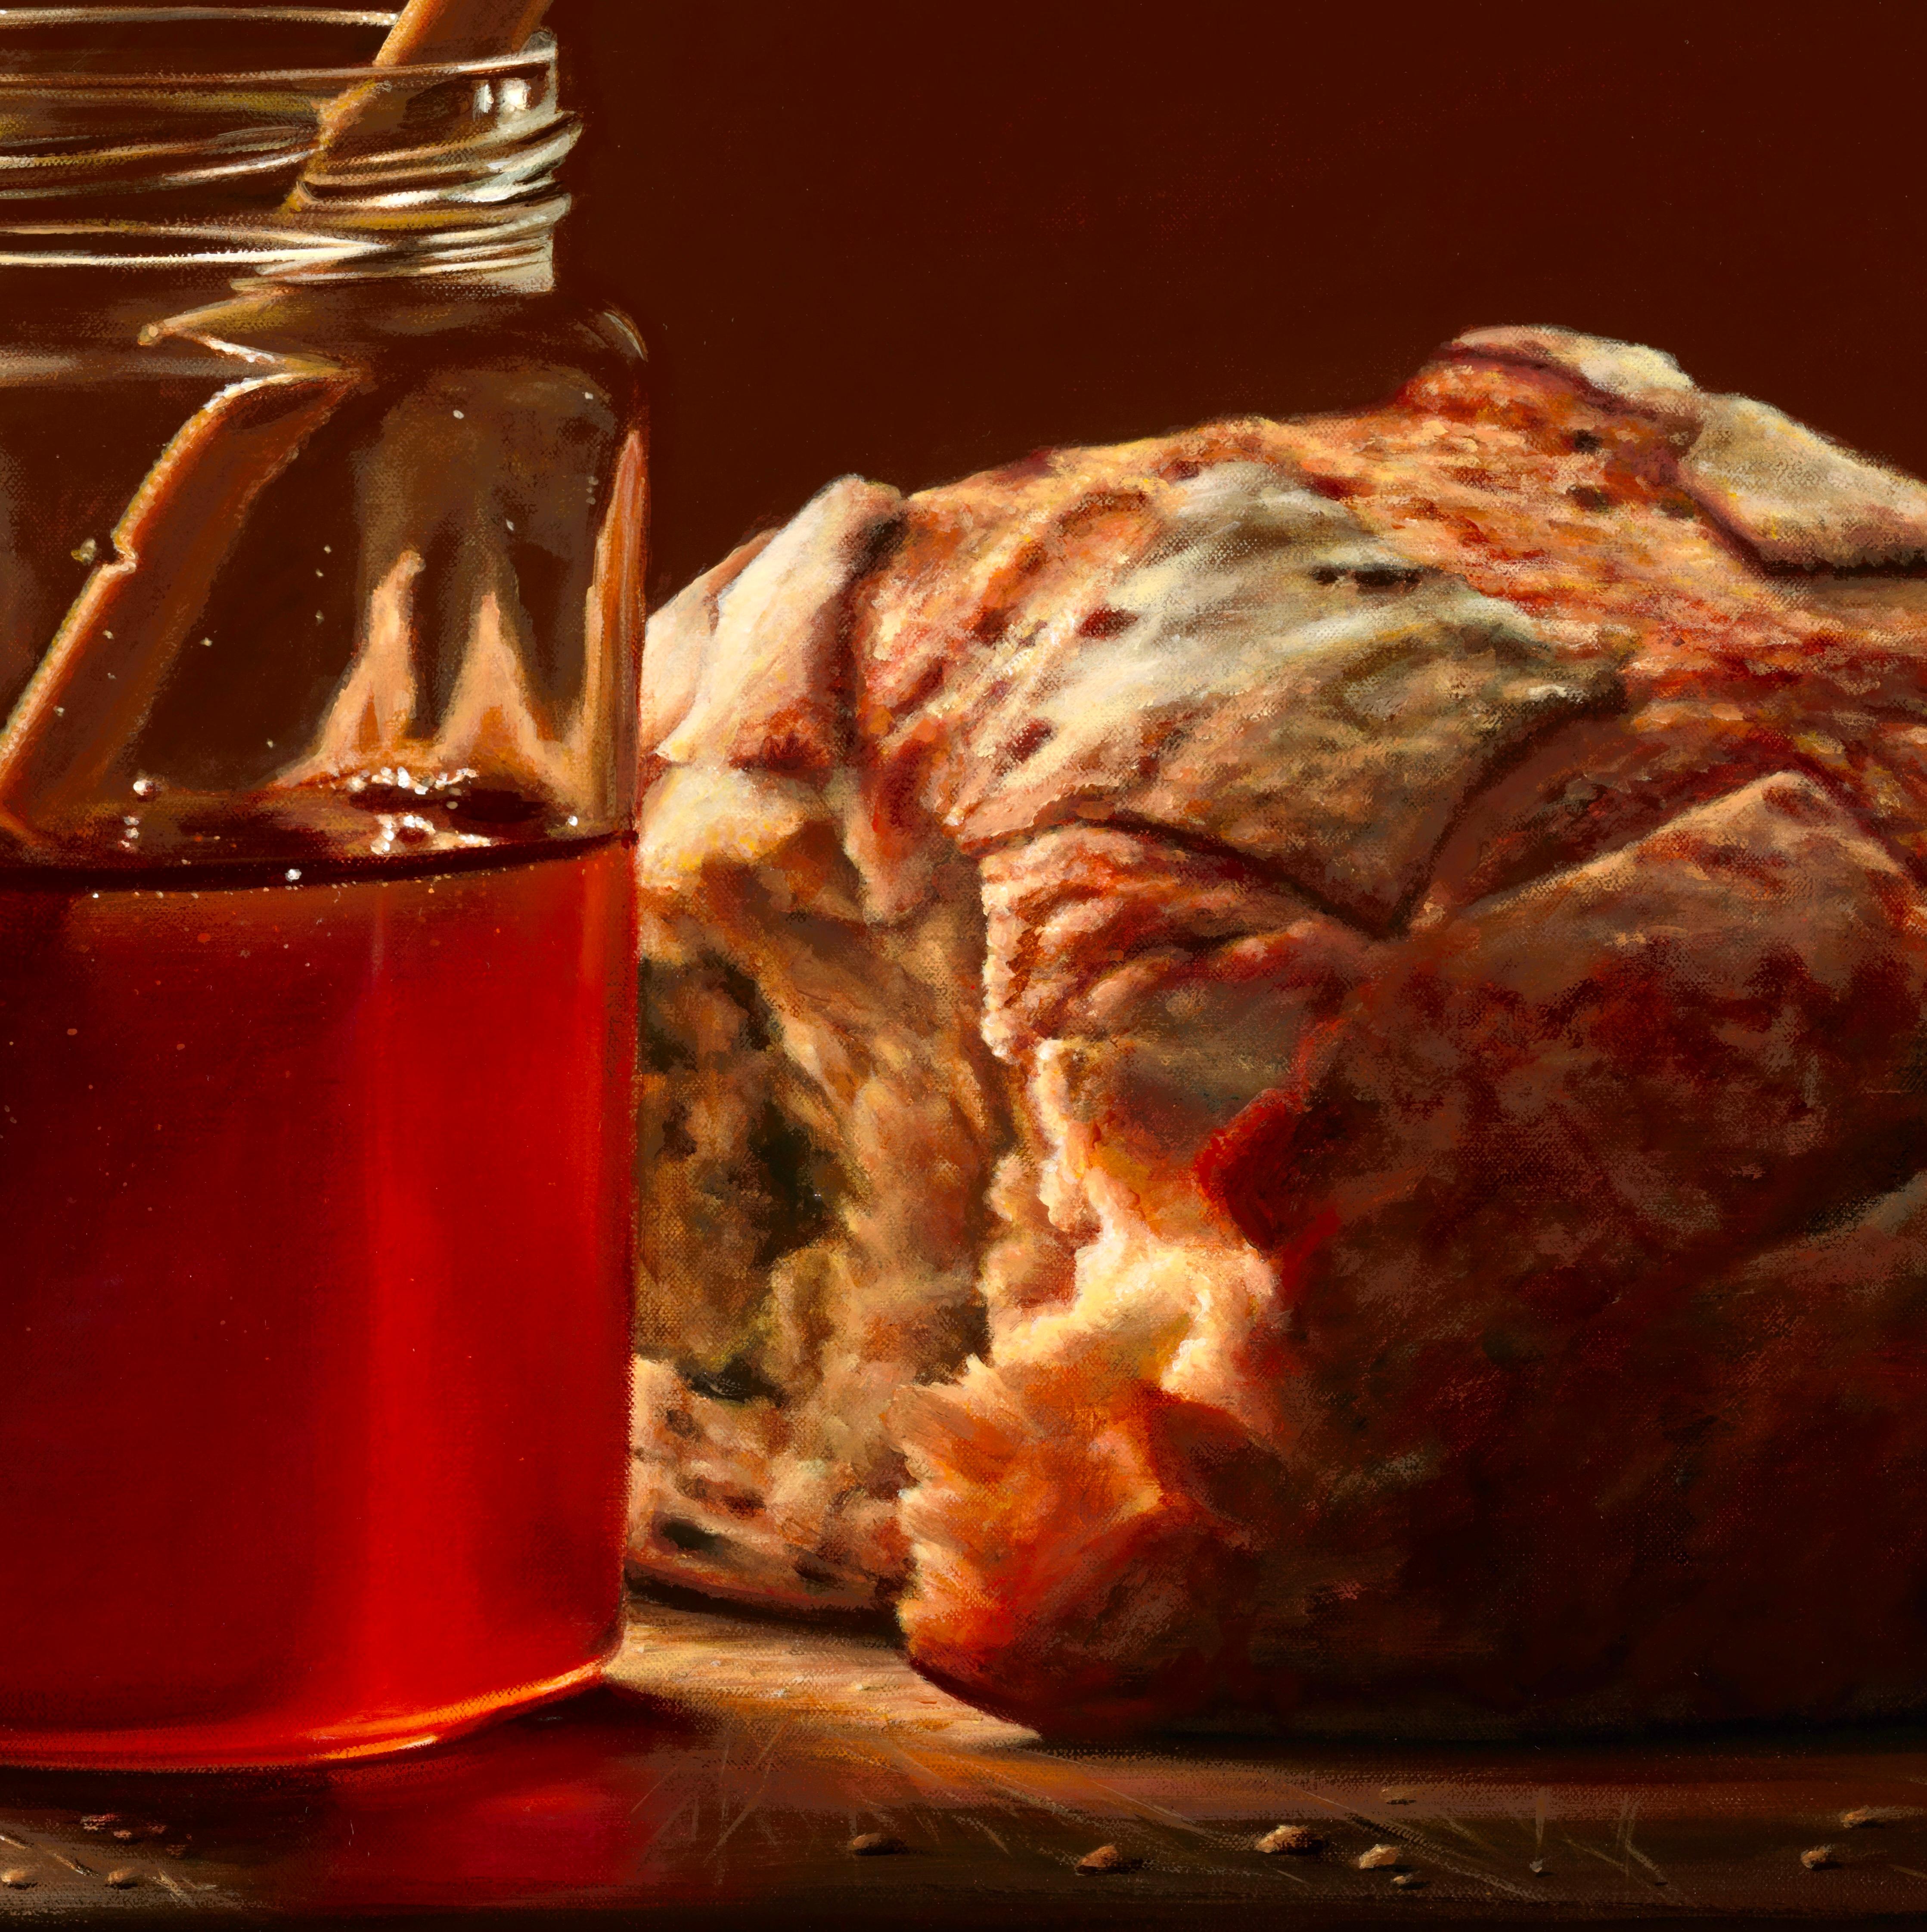 Honey and Bread - 21st Century Dutch Still-life painting - Contemporary Painting by Heidi von Faber